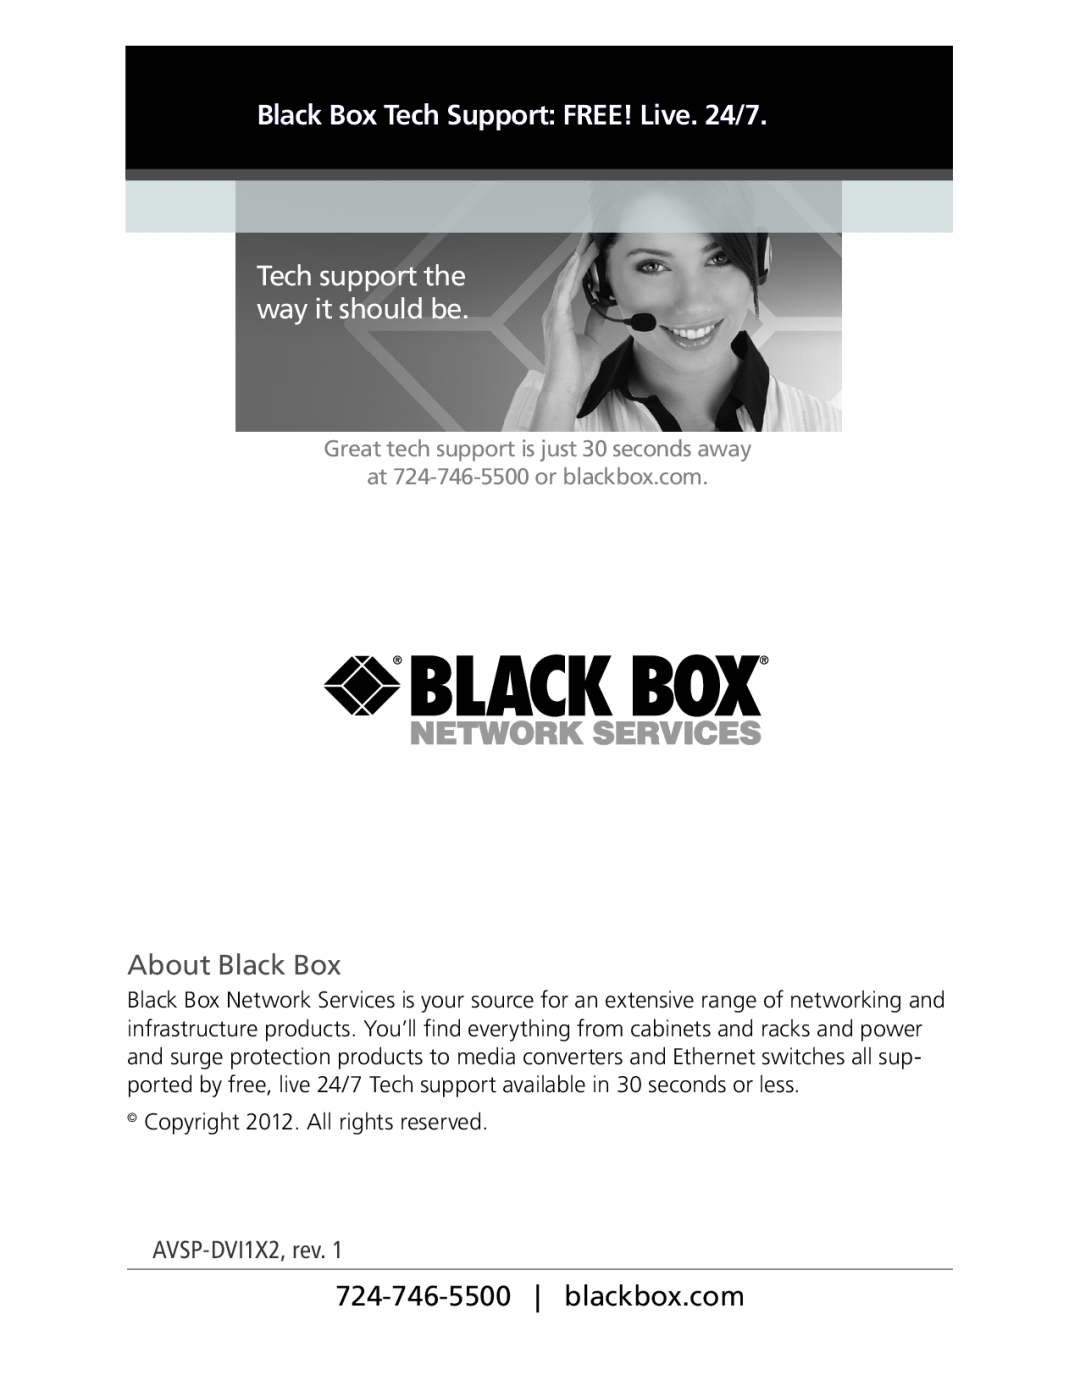 Black Box Tech support the way it should be, blackbox.com, Black Box Tech Support: FREE! Live. 24/7, AVSP-DVI1X2,rev 